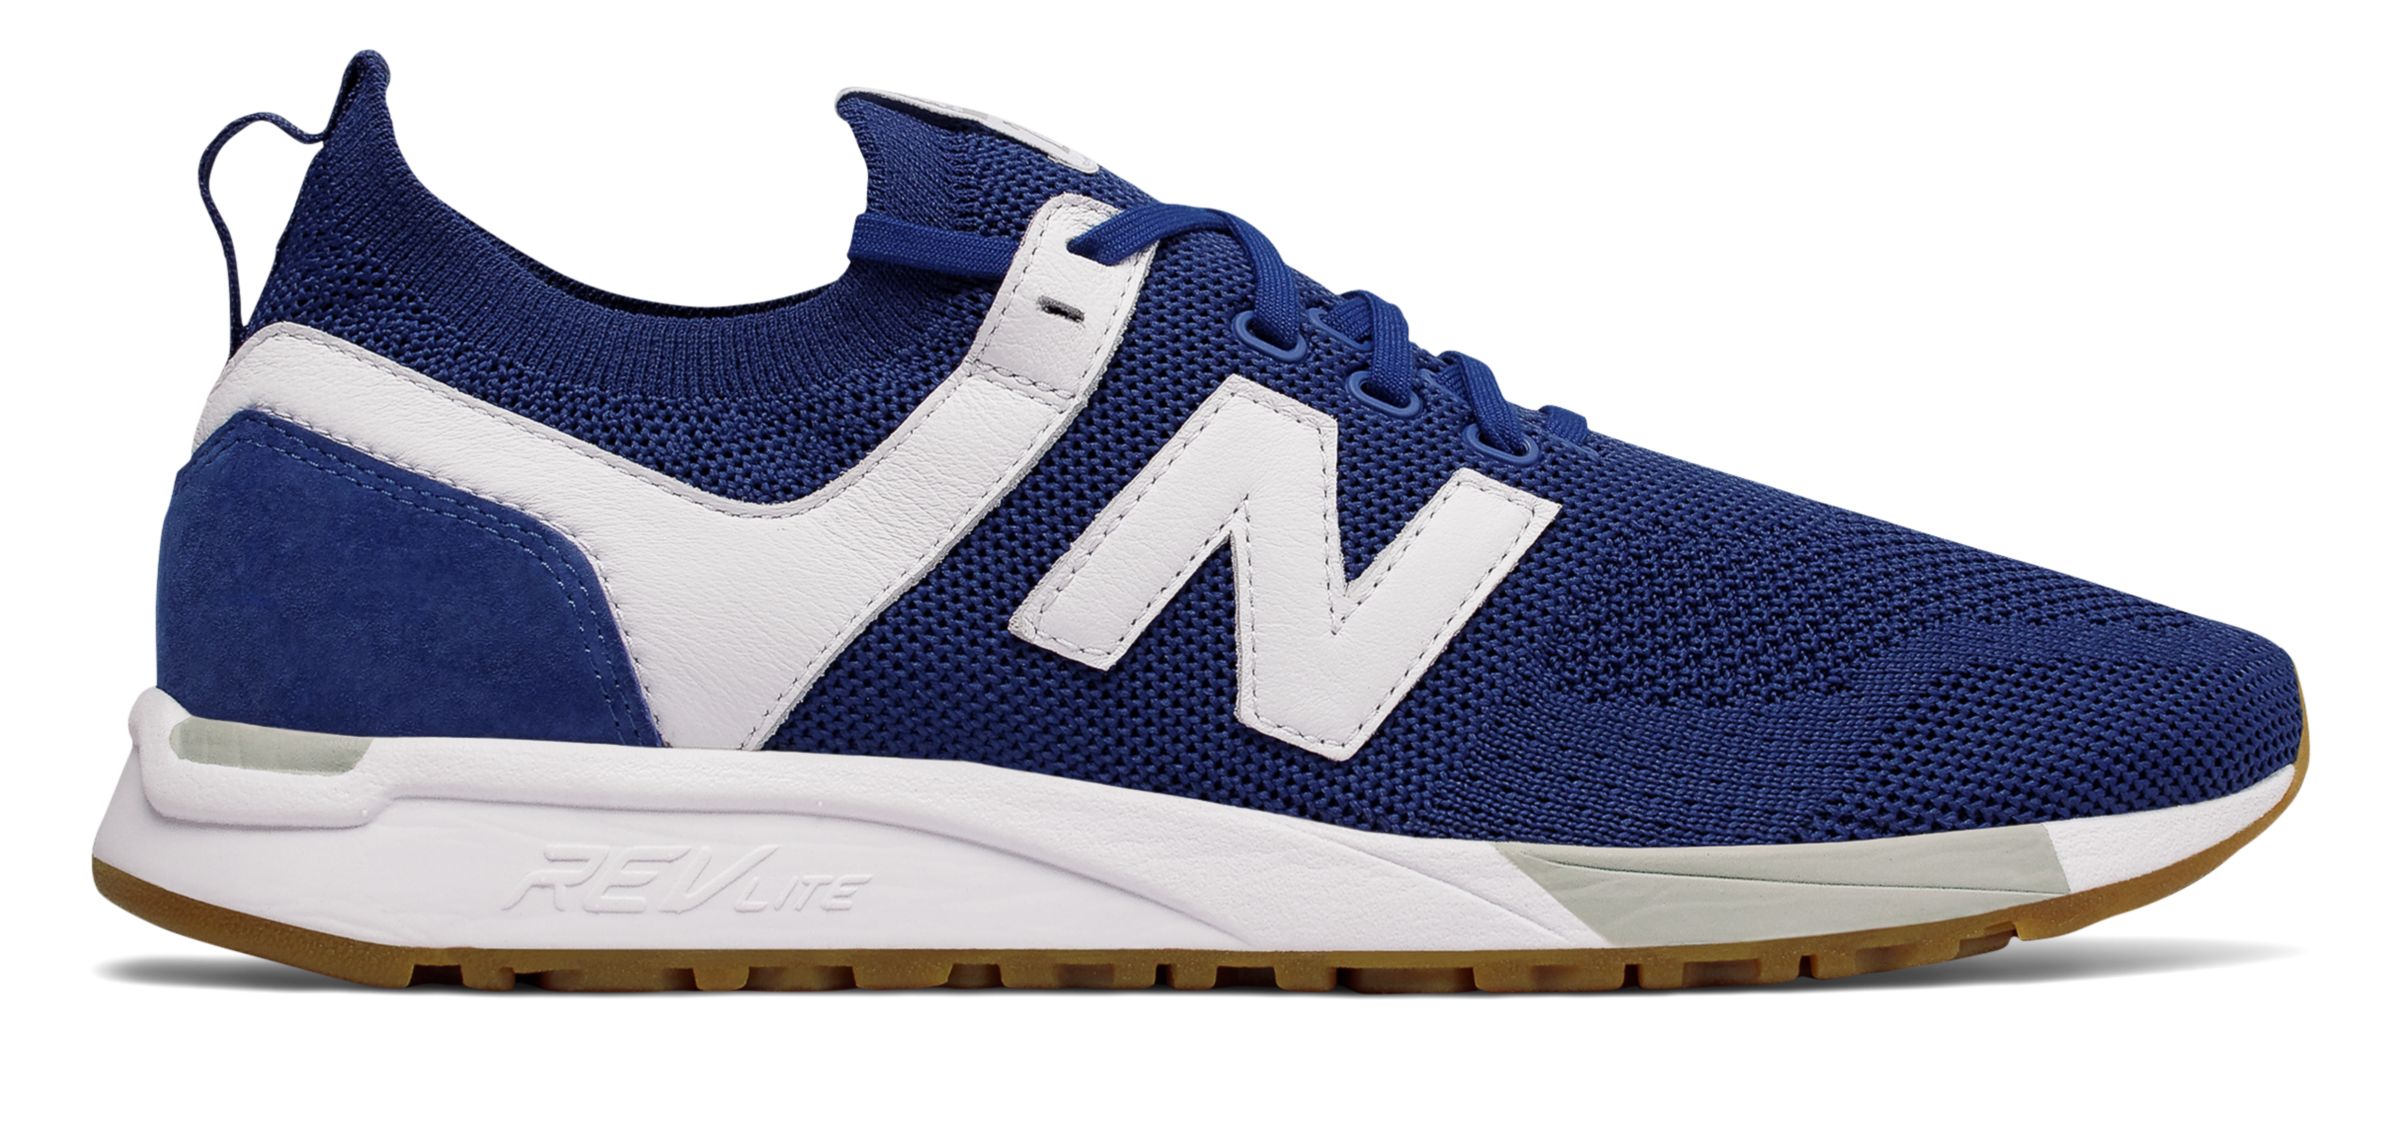 New Balance MRL247-DEM on Sale - Discounts Up to 54% Off on MRL247DU at  Joe's New Balance Outlet